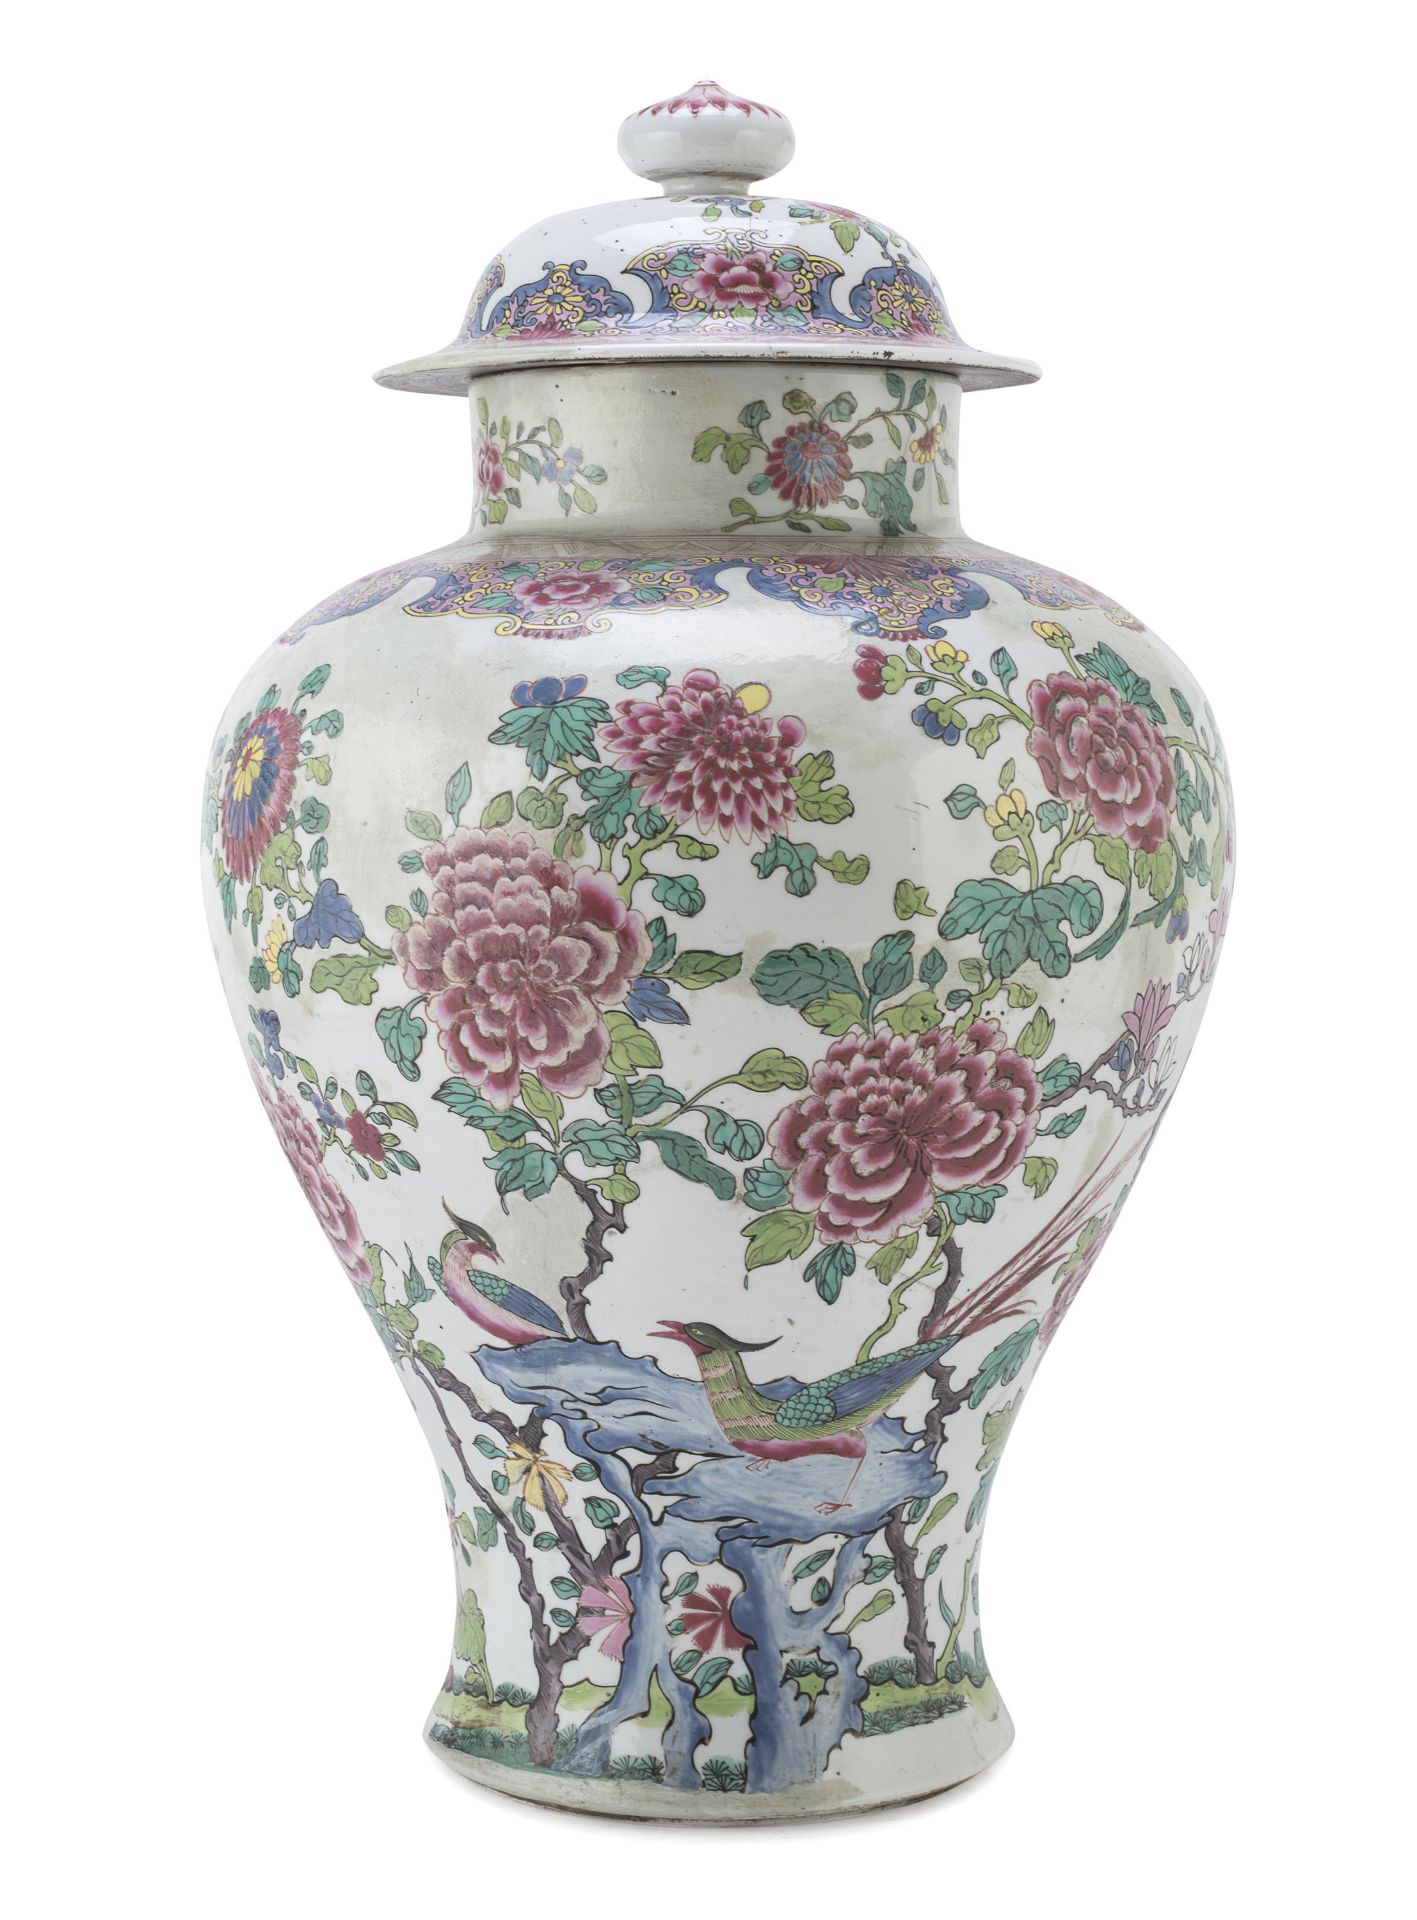 LIDDED PORCELAIN VASE WITH POLYCHROME ENAMELS CHINA EARLY 20TH CENTURY